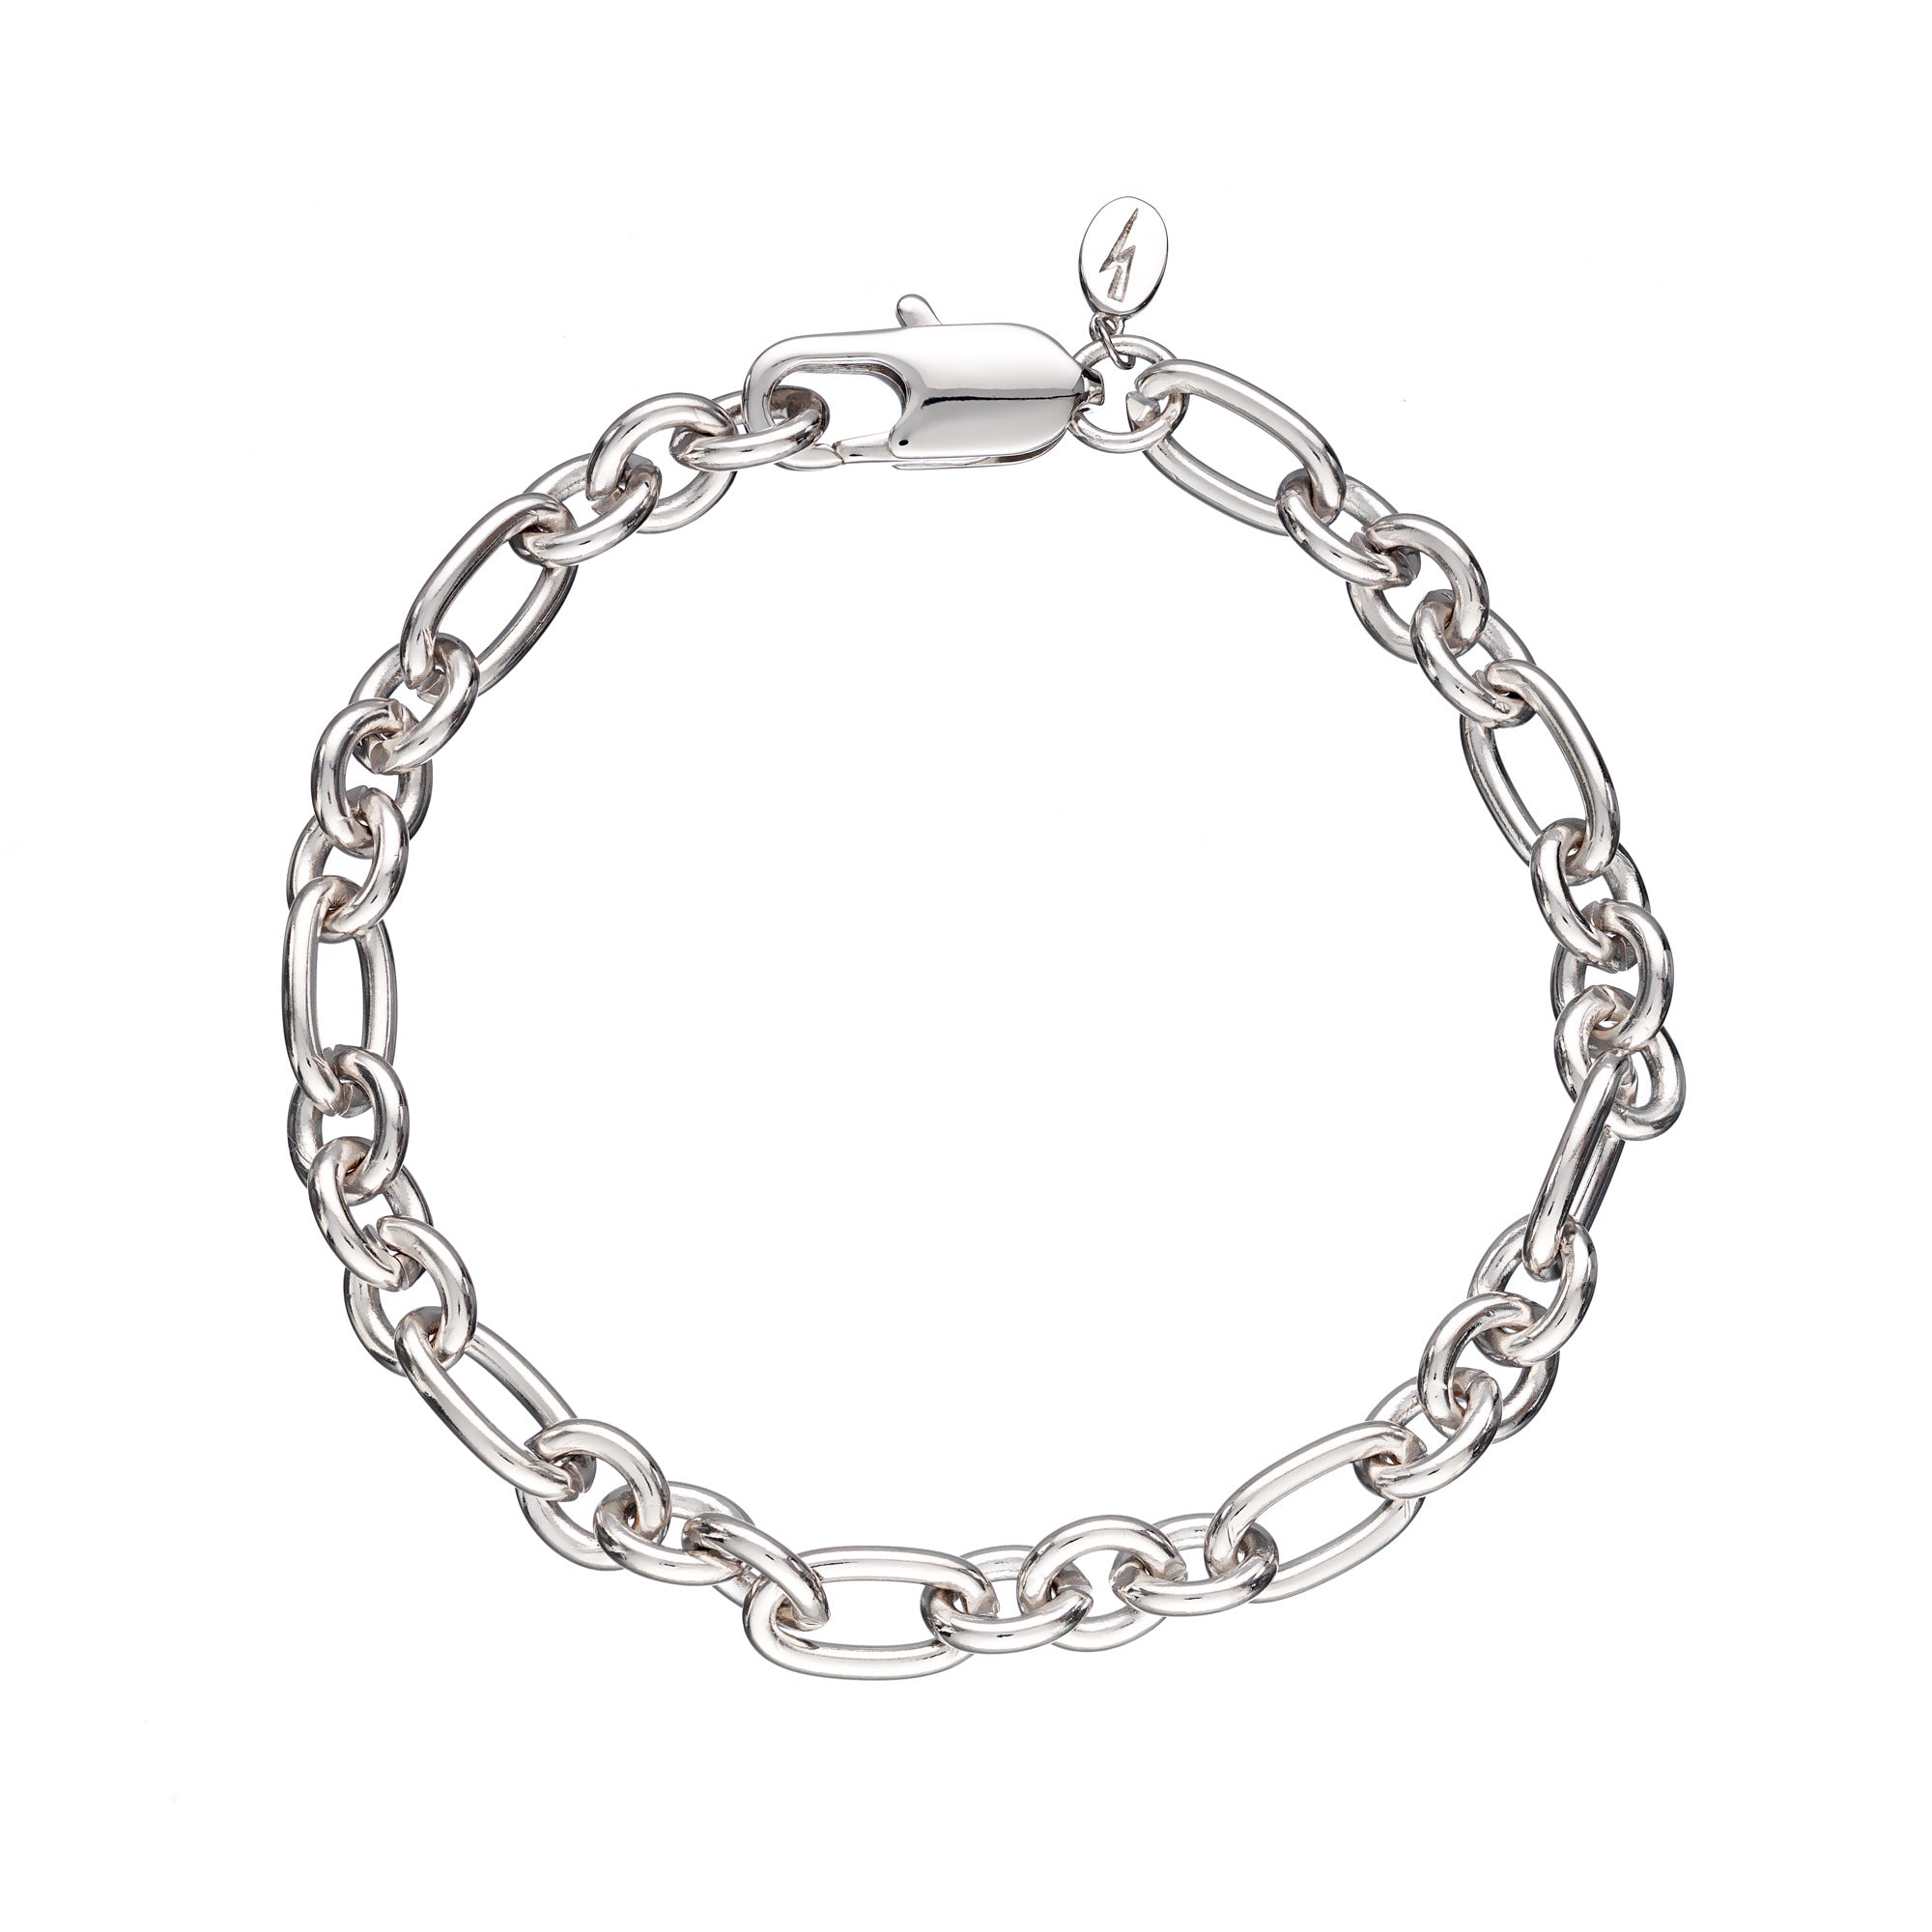 Chunky Chain Bracelet with Parrot Clasp by Scream Pretty